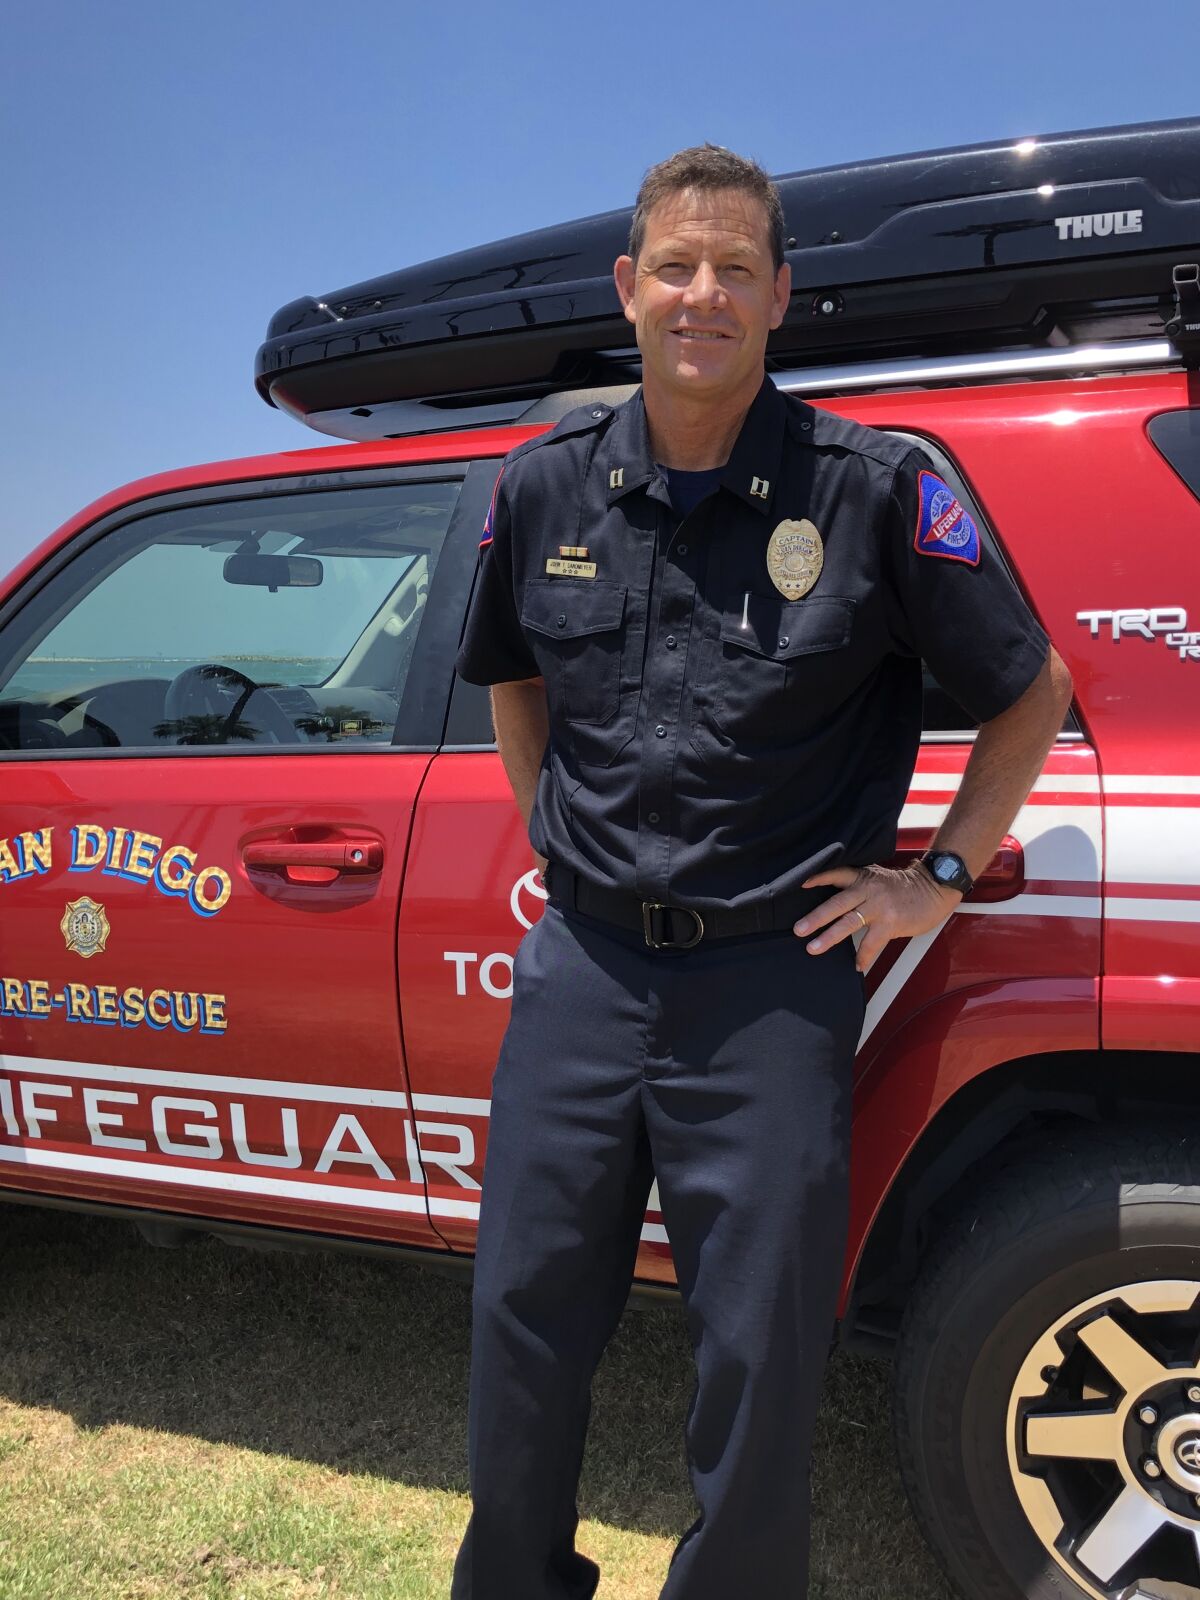 Now-retired San Diego lifeguard John Sandmeyer guarded La Jolla Shores from 1998 to 2013 as part of his 38 years’ experience.